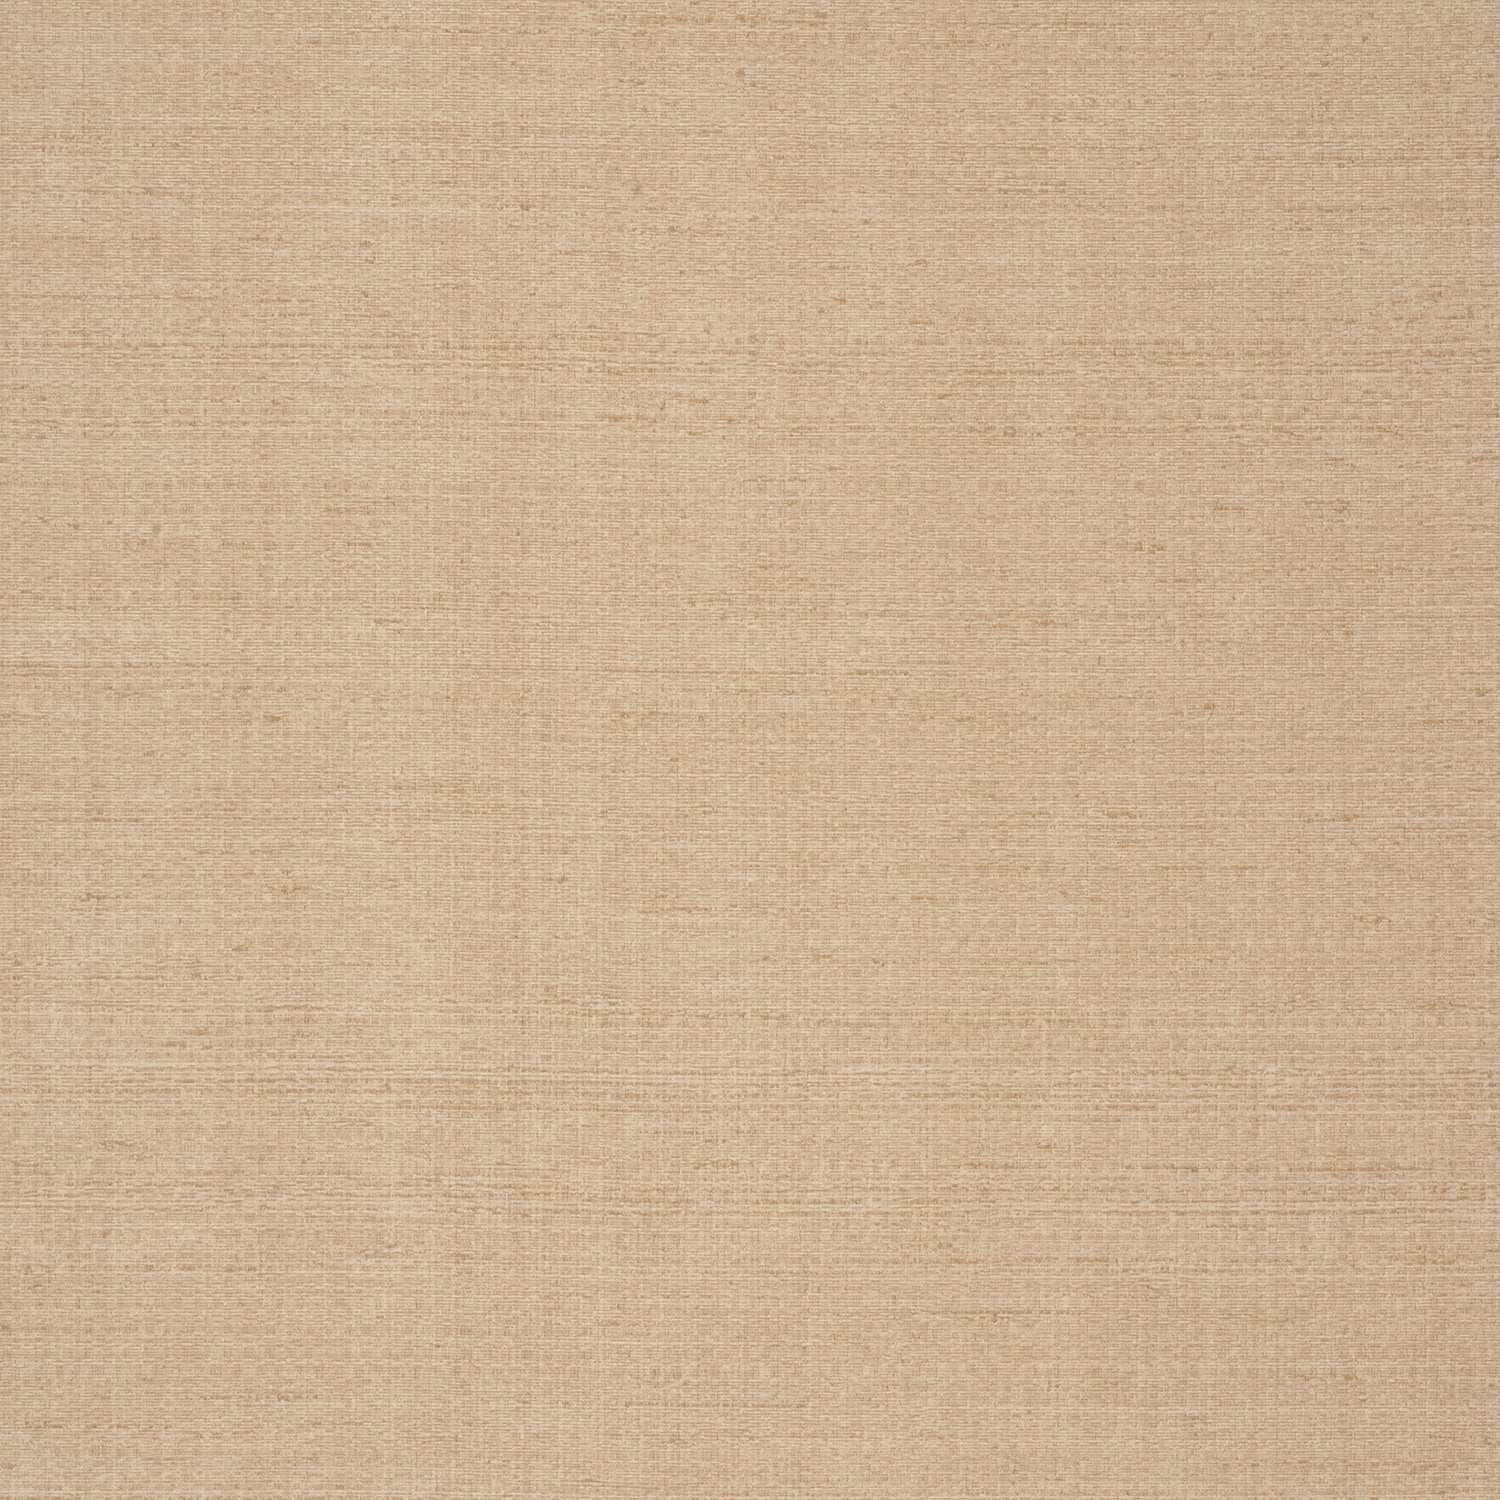 Oasis - Y44914 - Wallcovering - Vycon - Kube Contract